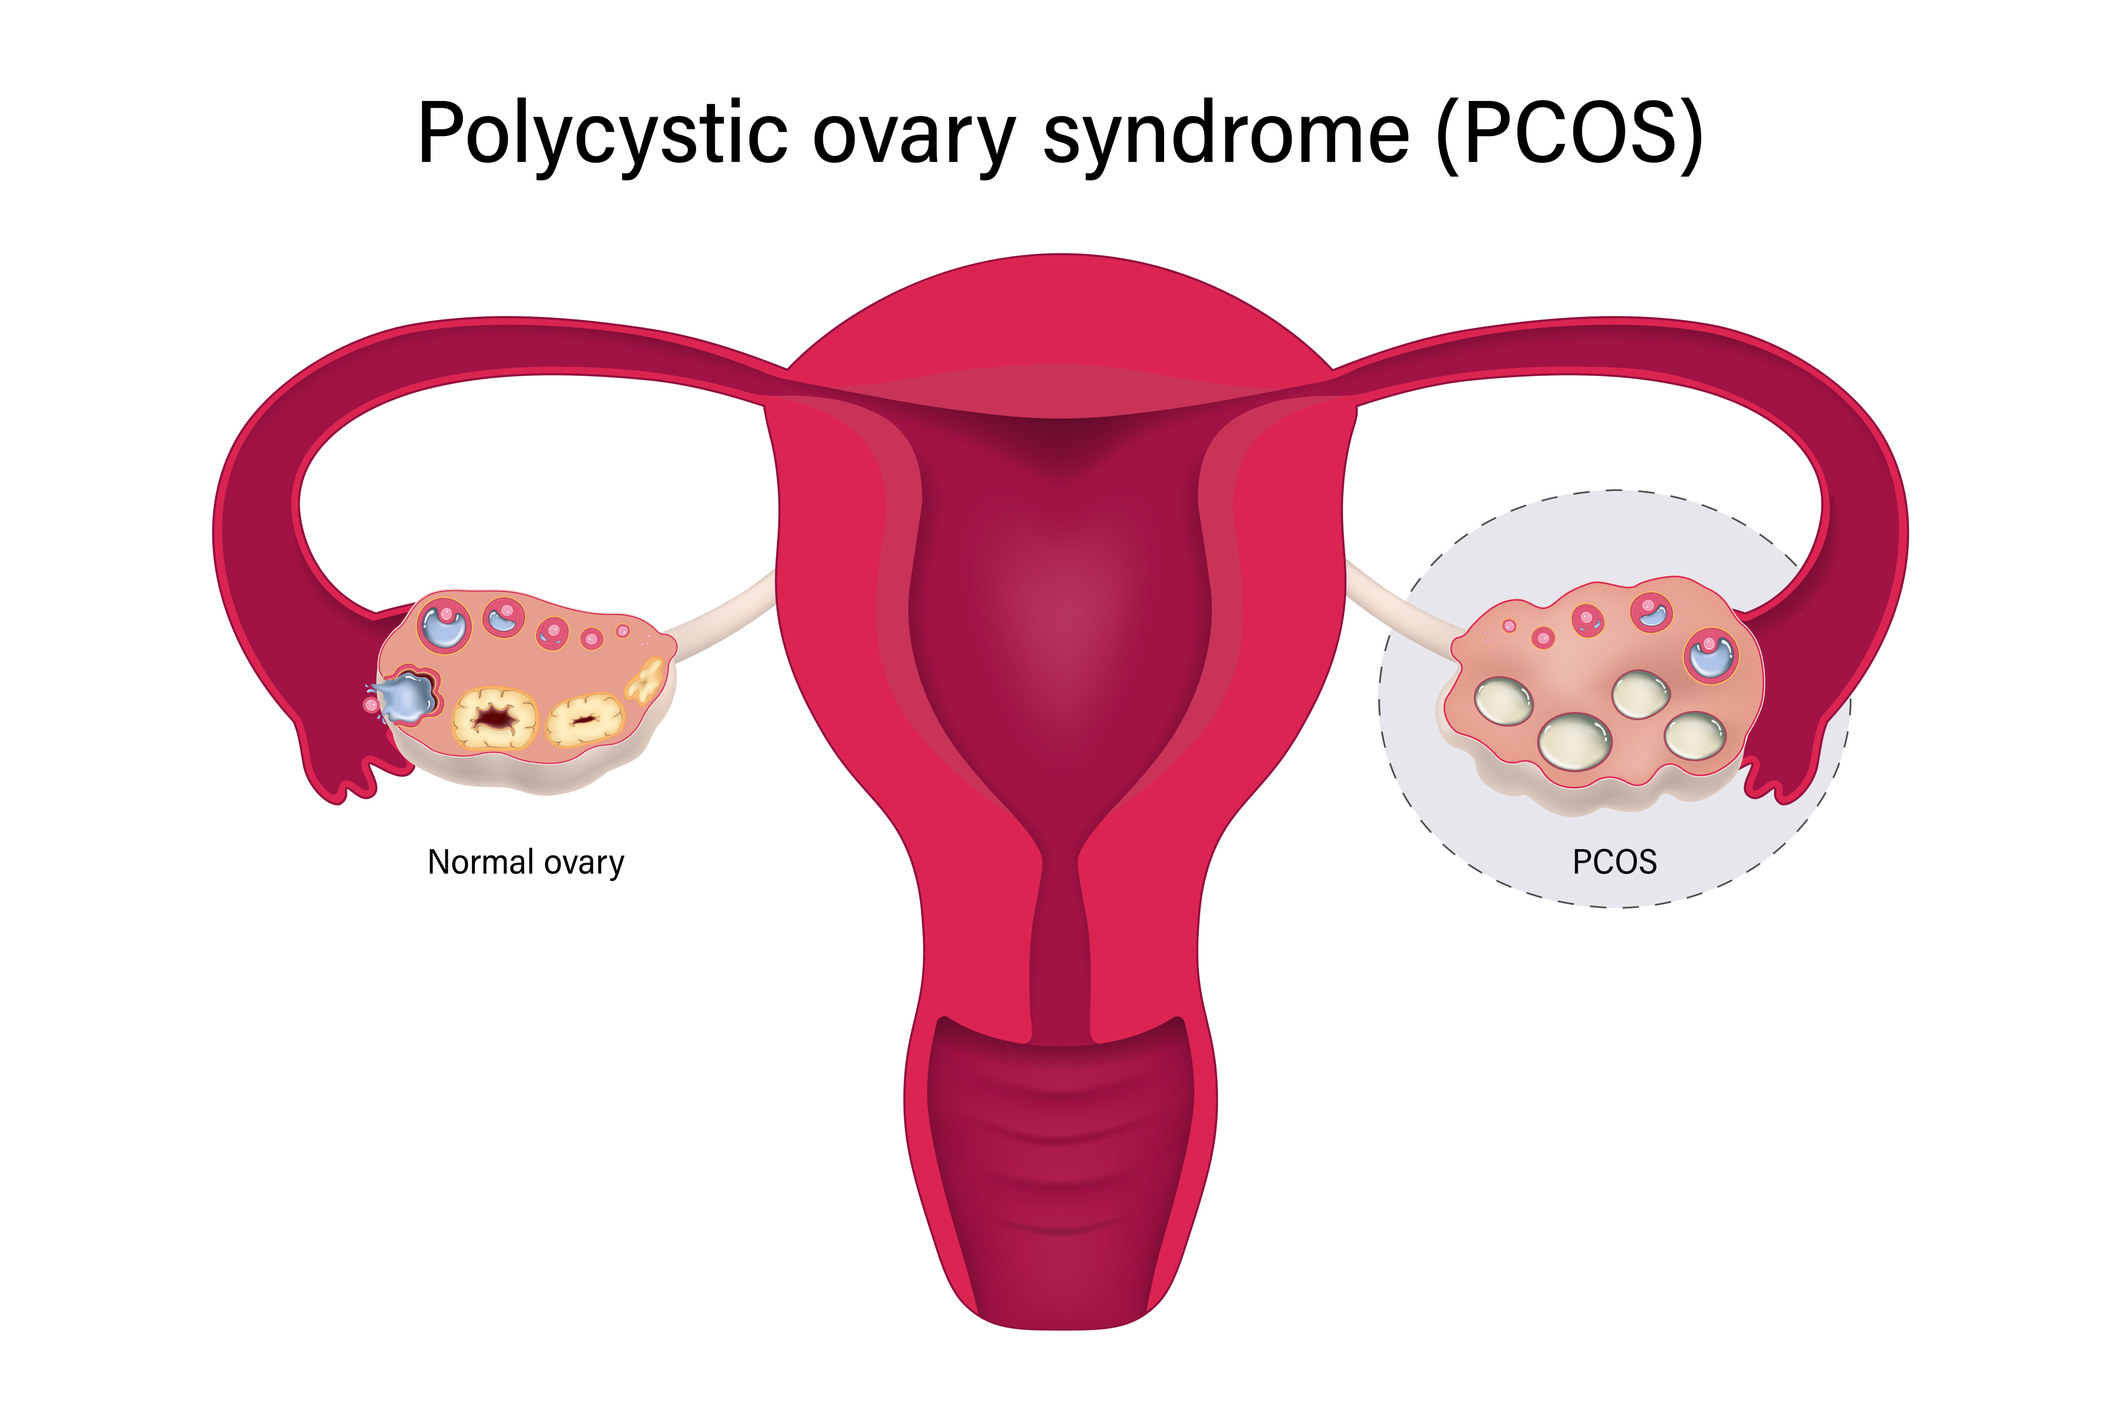 An illustration of a uterus with ovaries and cysts on ovaries demonstrating PCOS